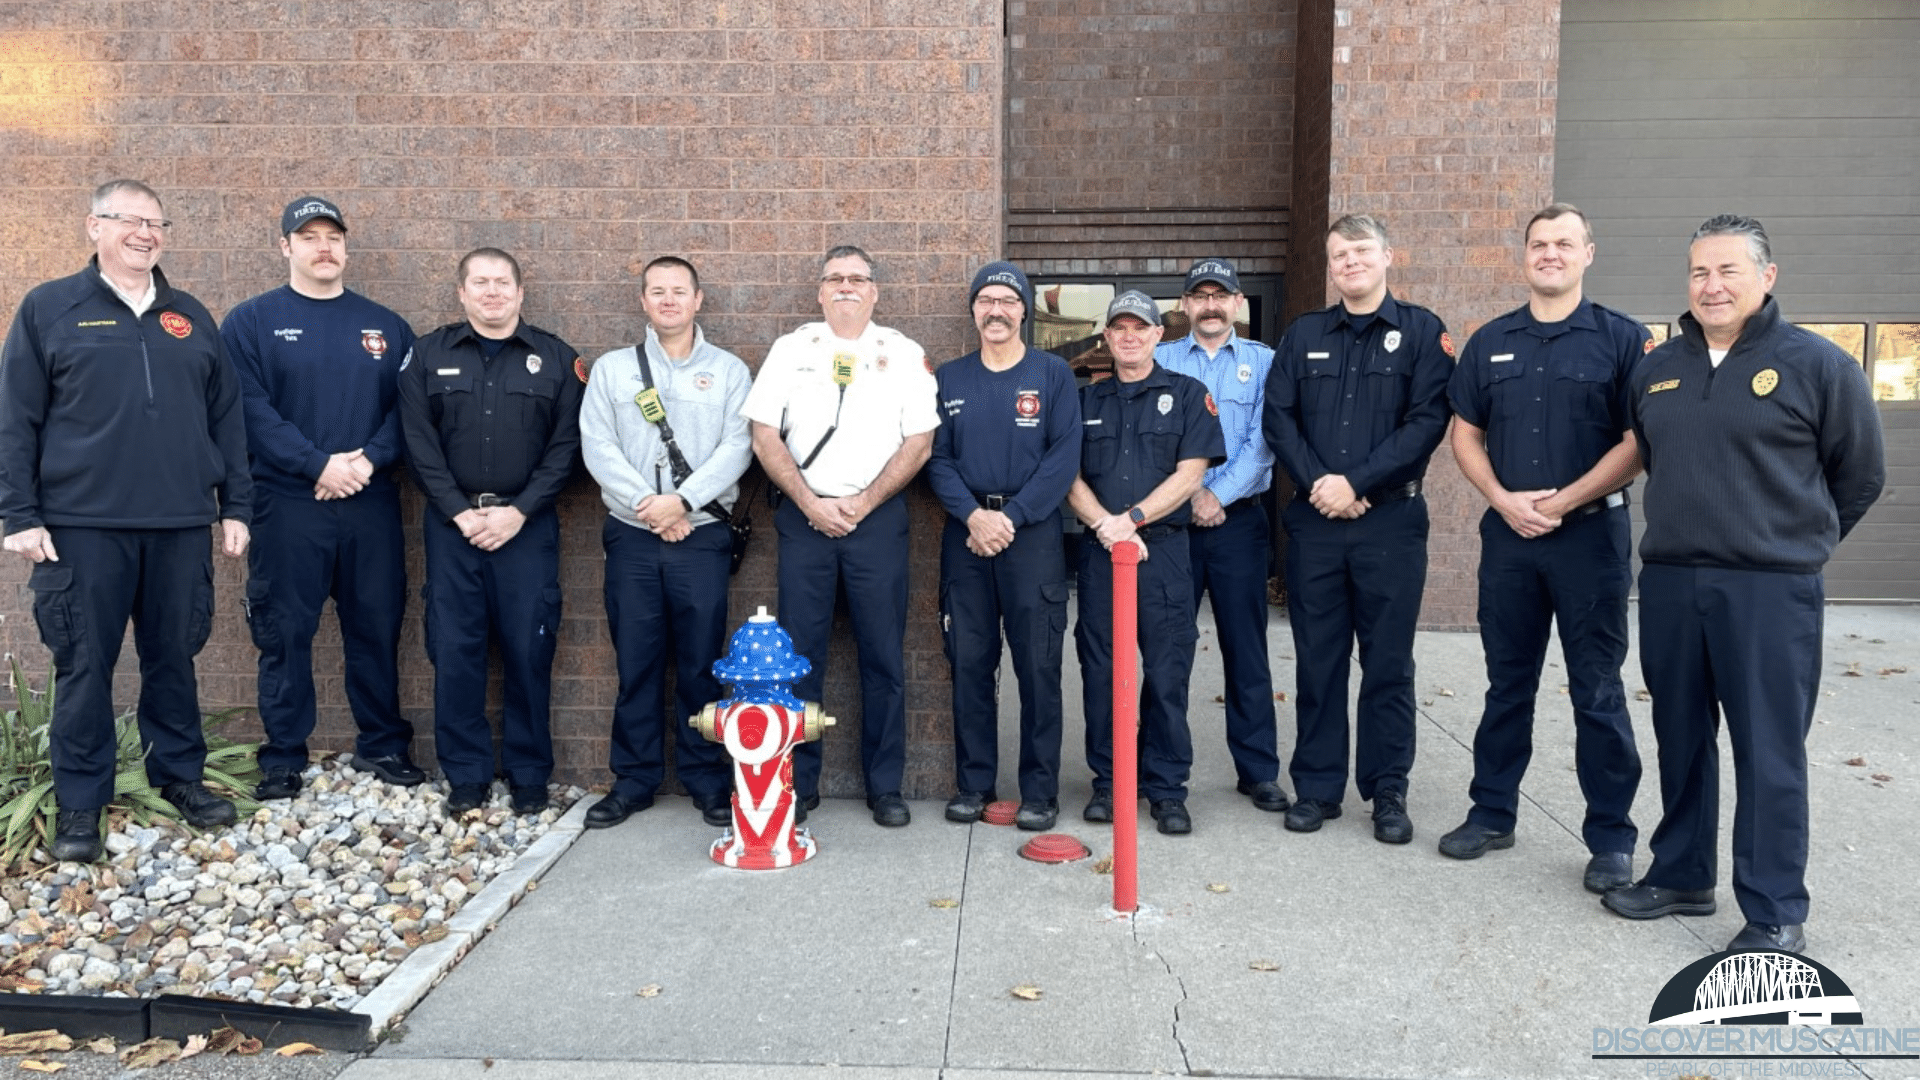 Chris P. Anderson paints tributes to firefighters, police